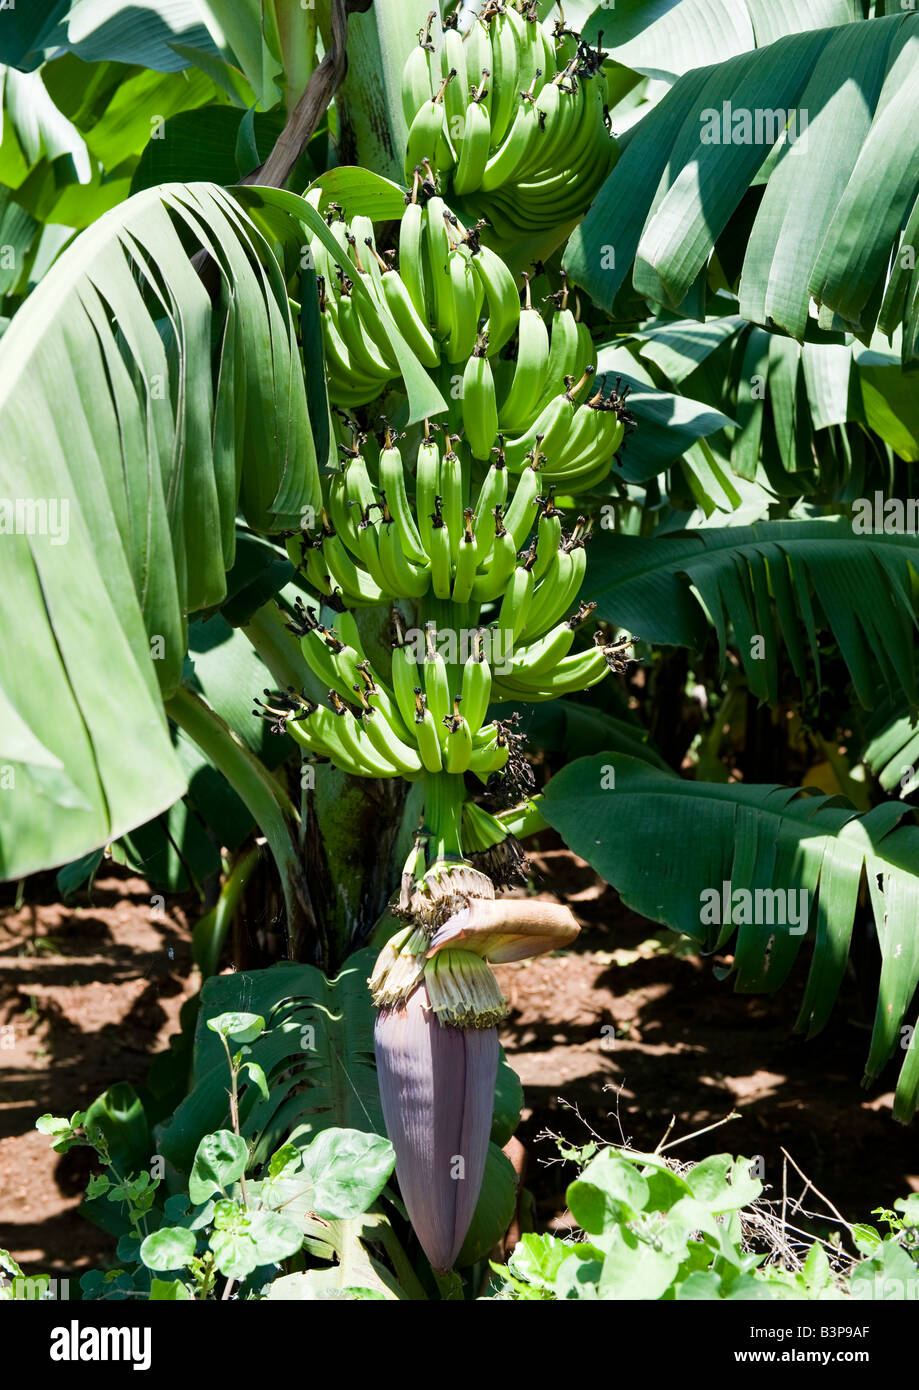 View of a banana tree showing the growth of bunches of bananas on its stem with its flower getting ready for cultivation. Stock Photo